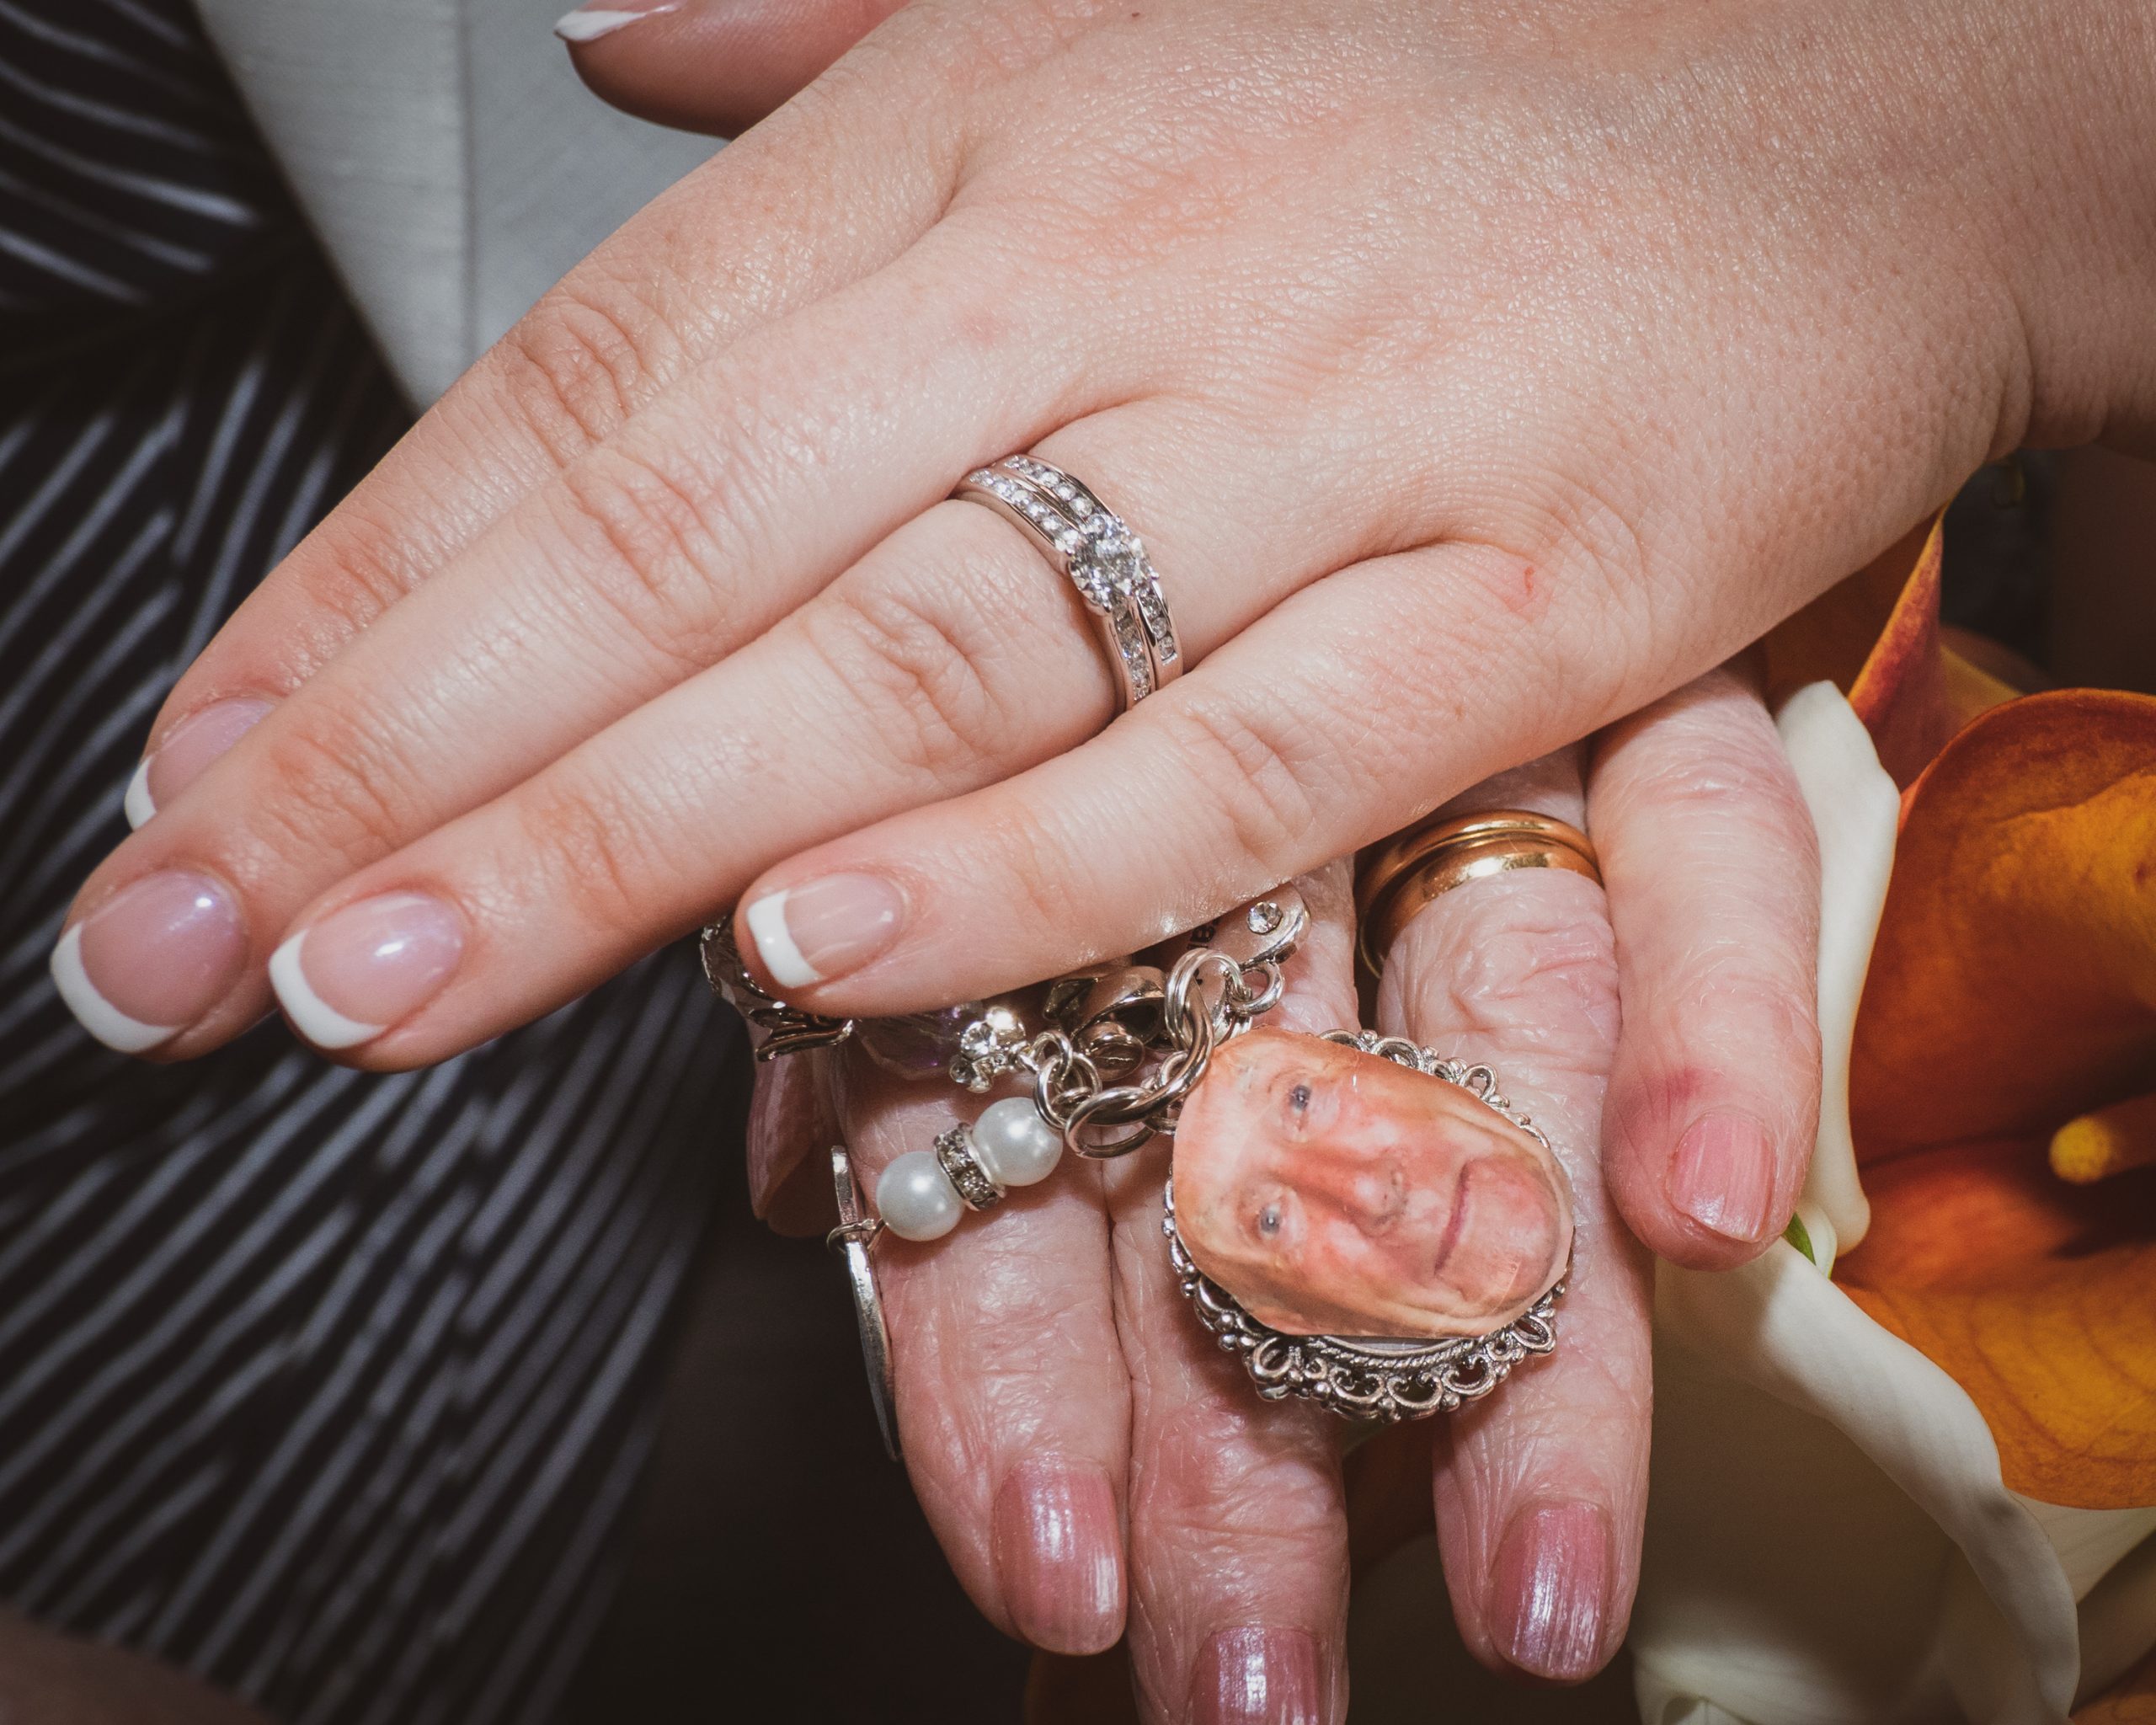 Close-up of Bridal Hands, with Beautiful French Polish Holding a Keyring of Her Dear Granddad